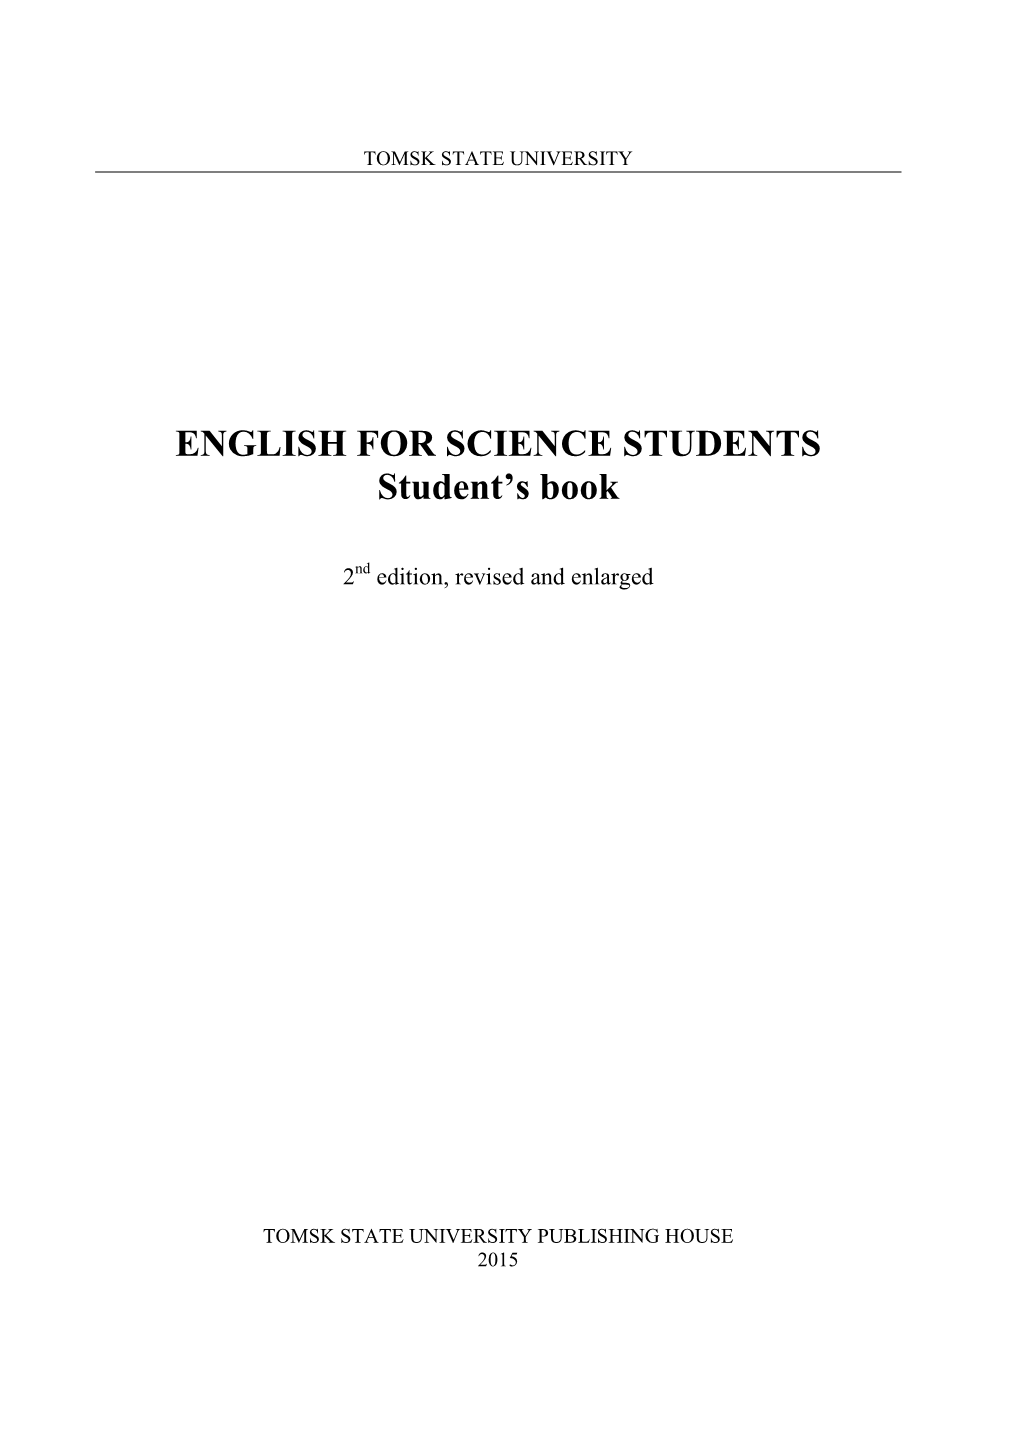 ENGLISH for SCIENCE STUDENTS Student's Book